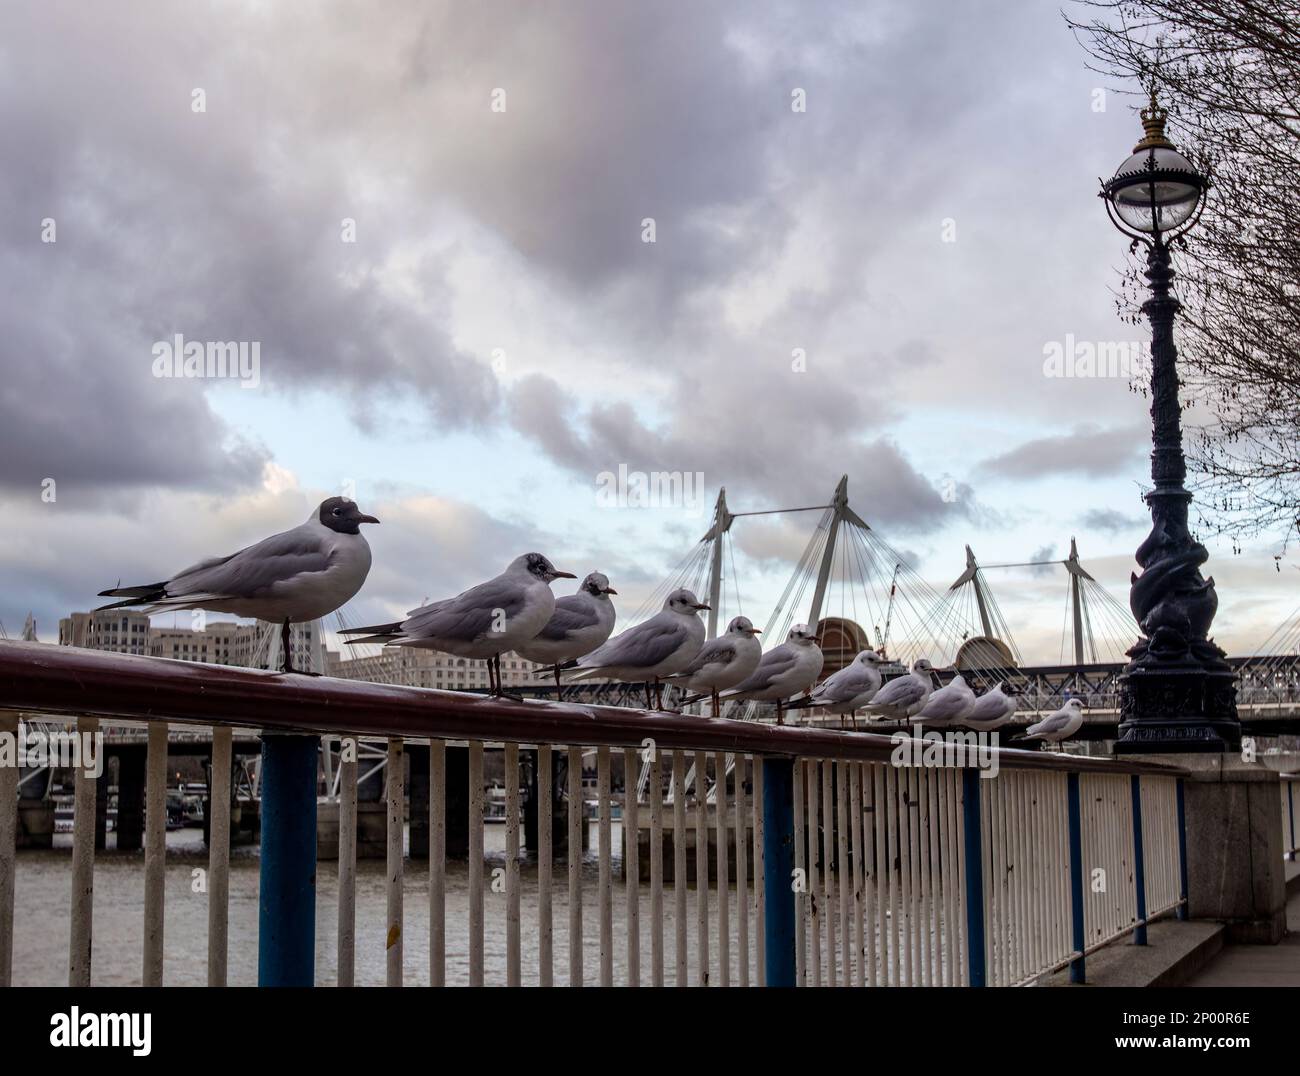 A row of gulls on metal railings on the South Bank of the River Thames in London, UK Stock Photo